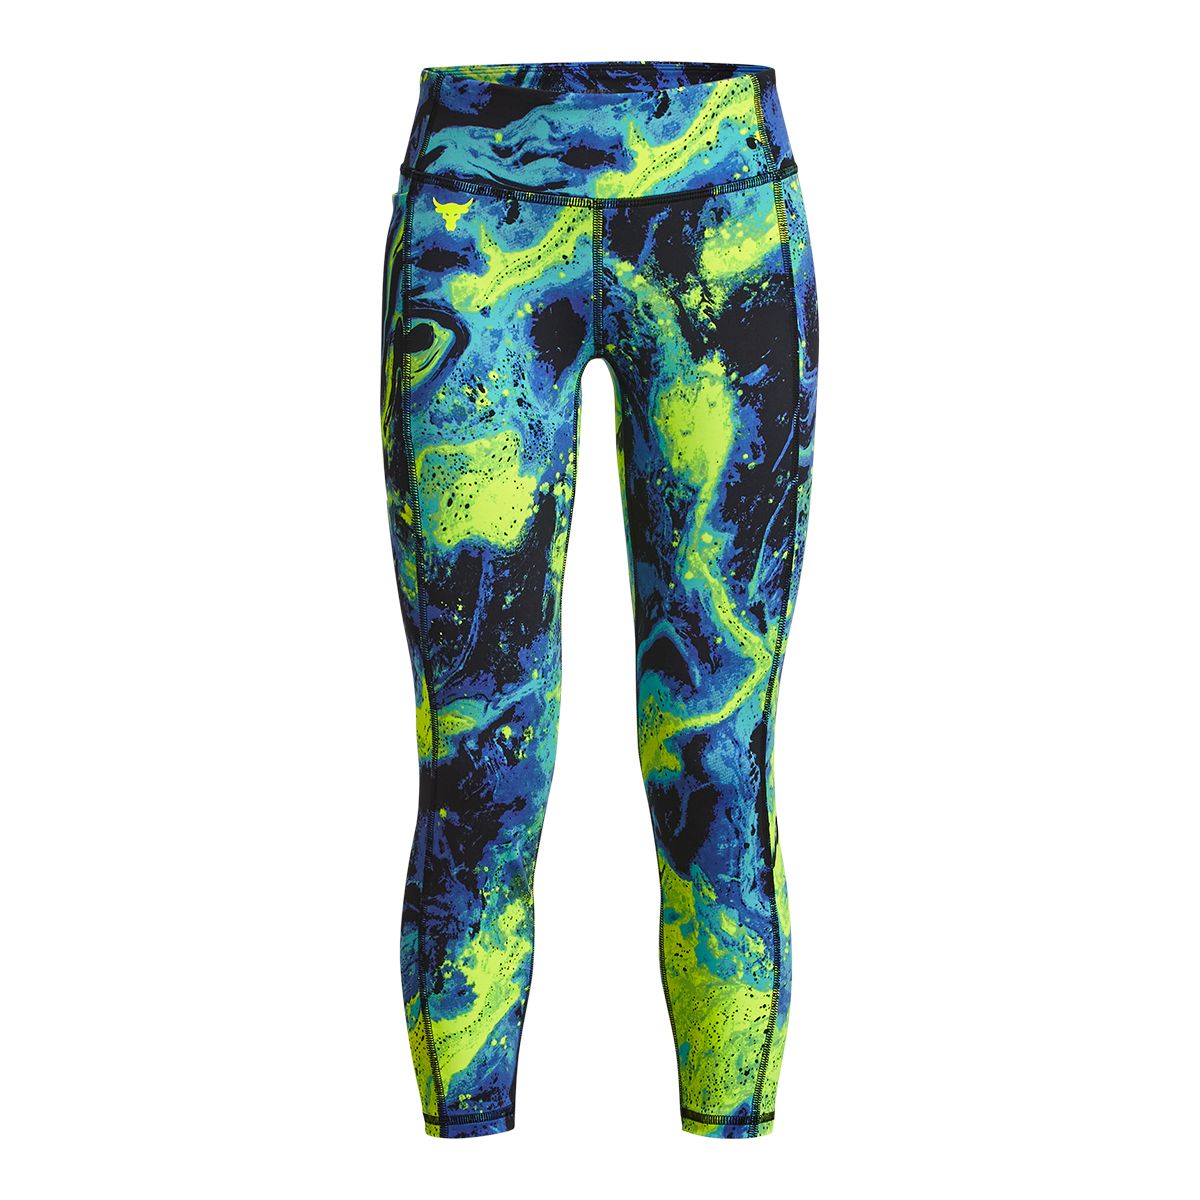 Image of Under Armour Girls' Project Rock Girls Lets go Leggings